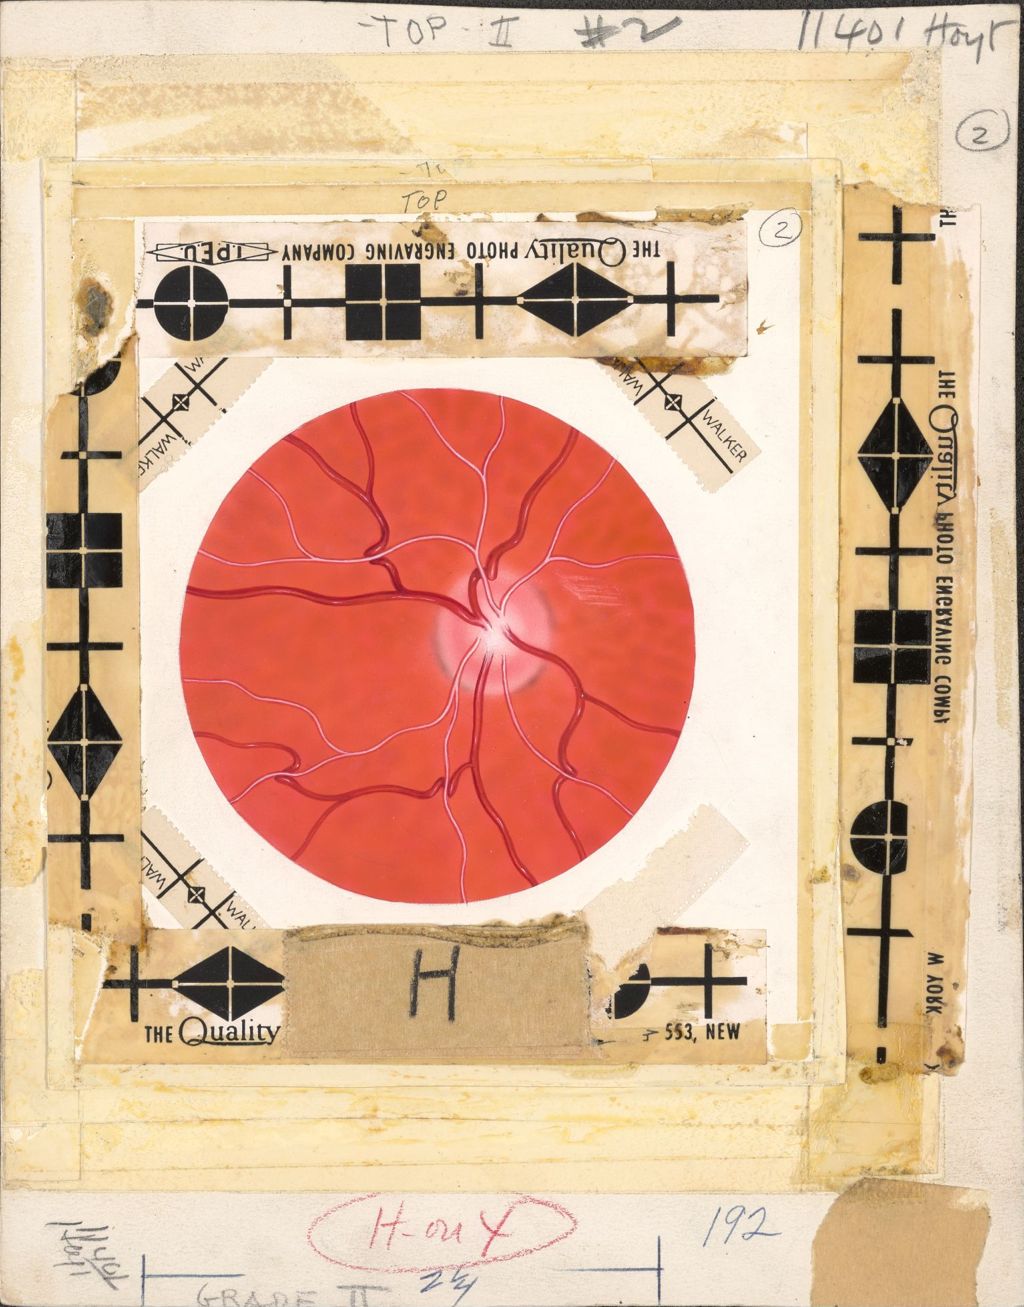 Miniature of Hypertension, Grade II, Artwork of veins, possibly fundus within eye